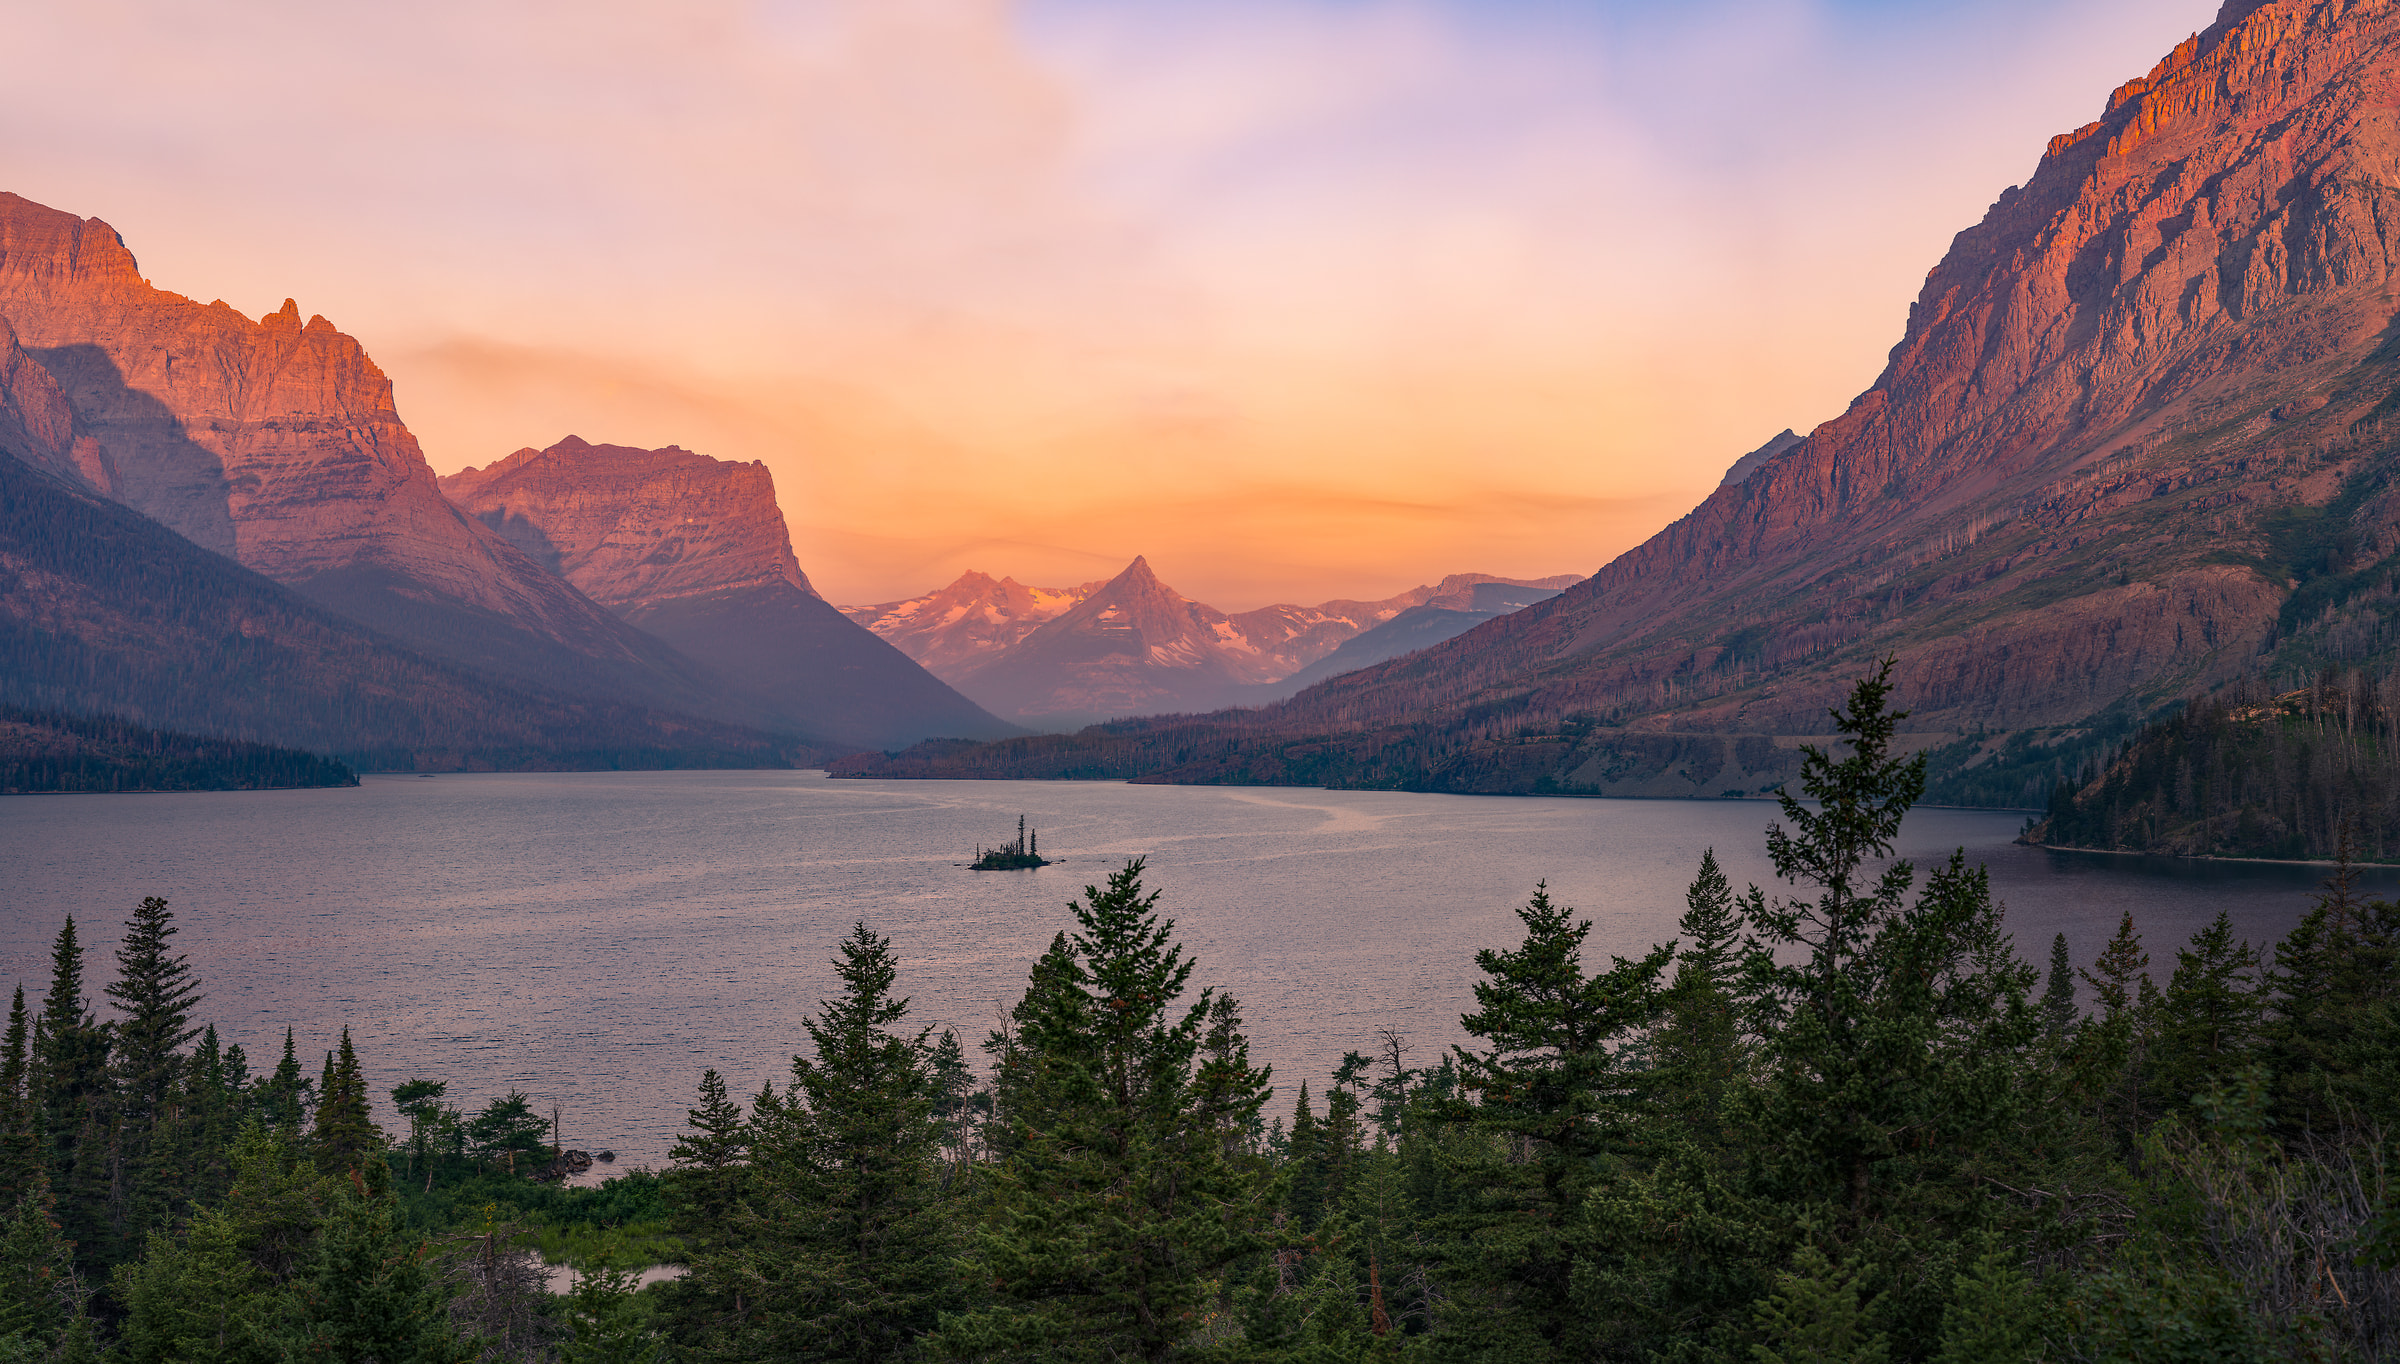 713 megapixels! A very high resolution, large-format VAST photo print of a lake and mountains at sunrise; wallpaper landscape photograph created by Chris Blake in Glacier National Park, Montana.